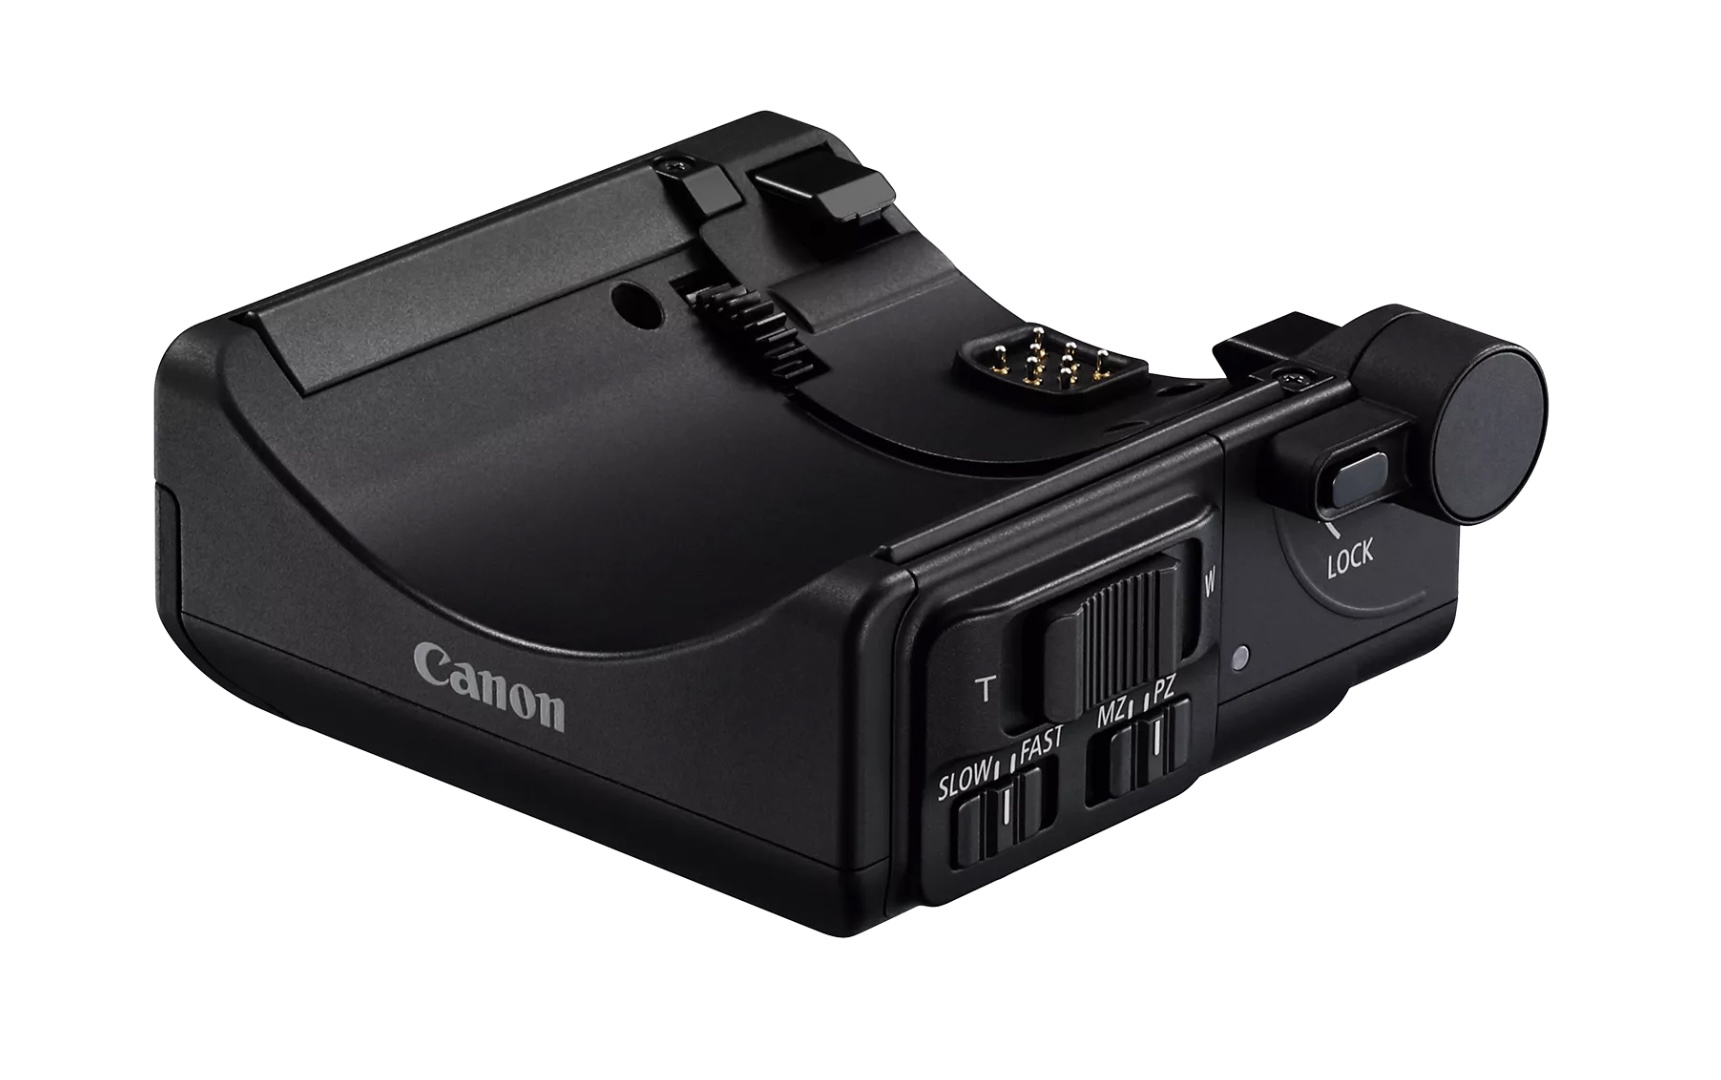 Solved: Updates for PZ-E1 power zoom and EOS R6 Mark II - Canon 